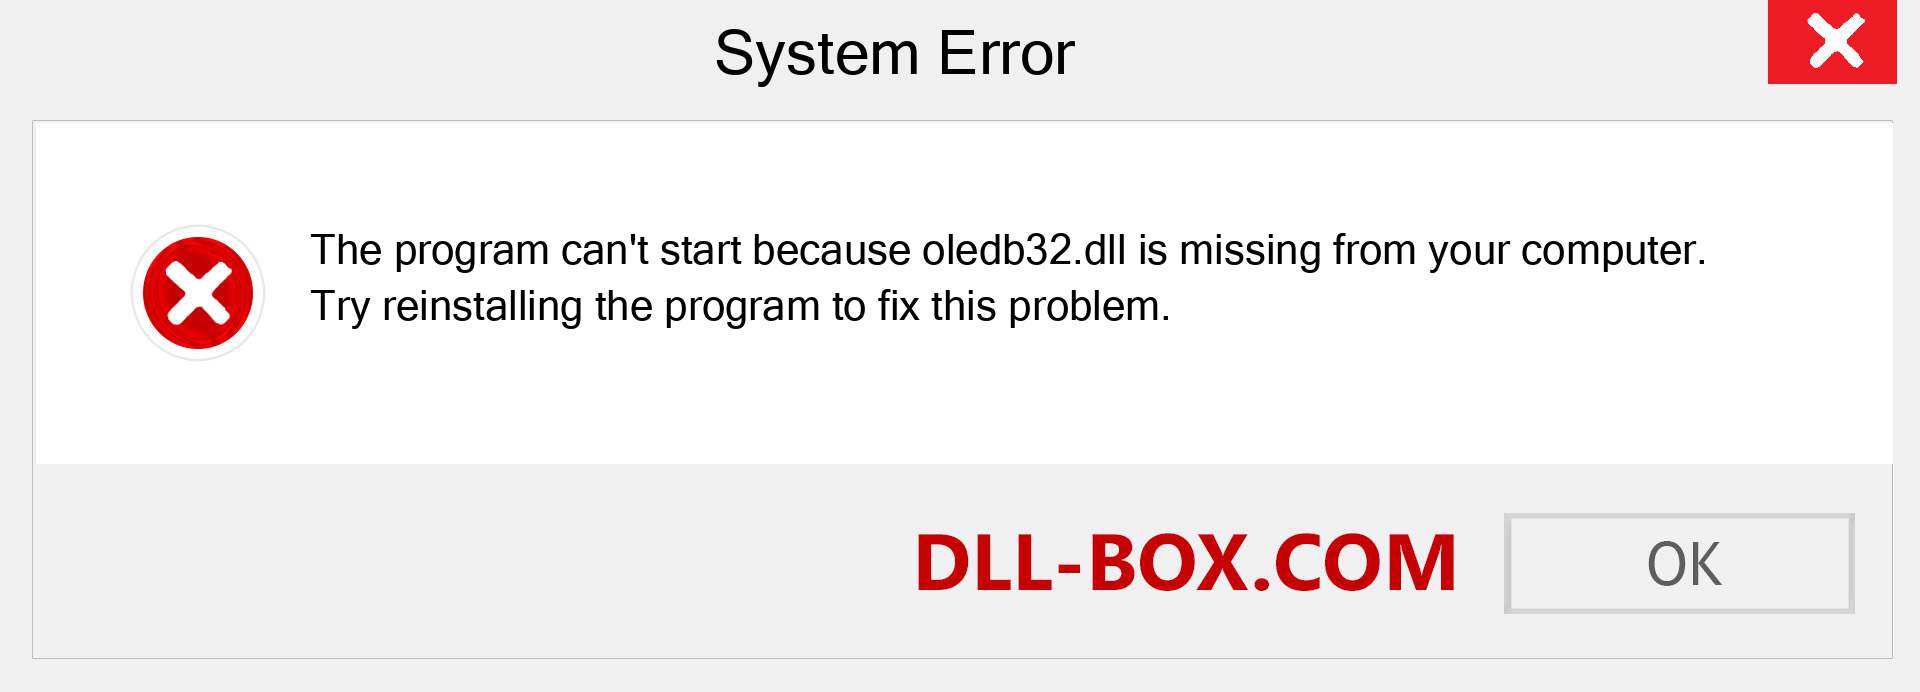  oledb32.dll file is missing?. Download for Windows 7, 8, 10 - Fix  oledb32 dll Missing Error on Windows, photos, images